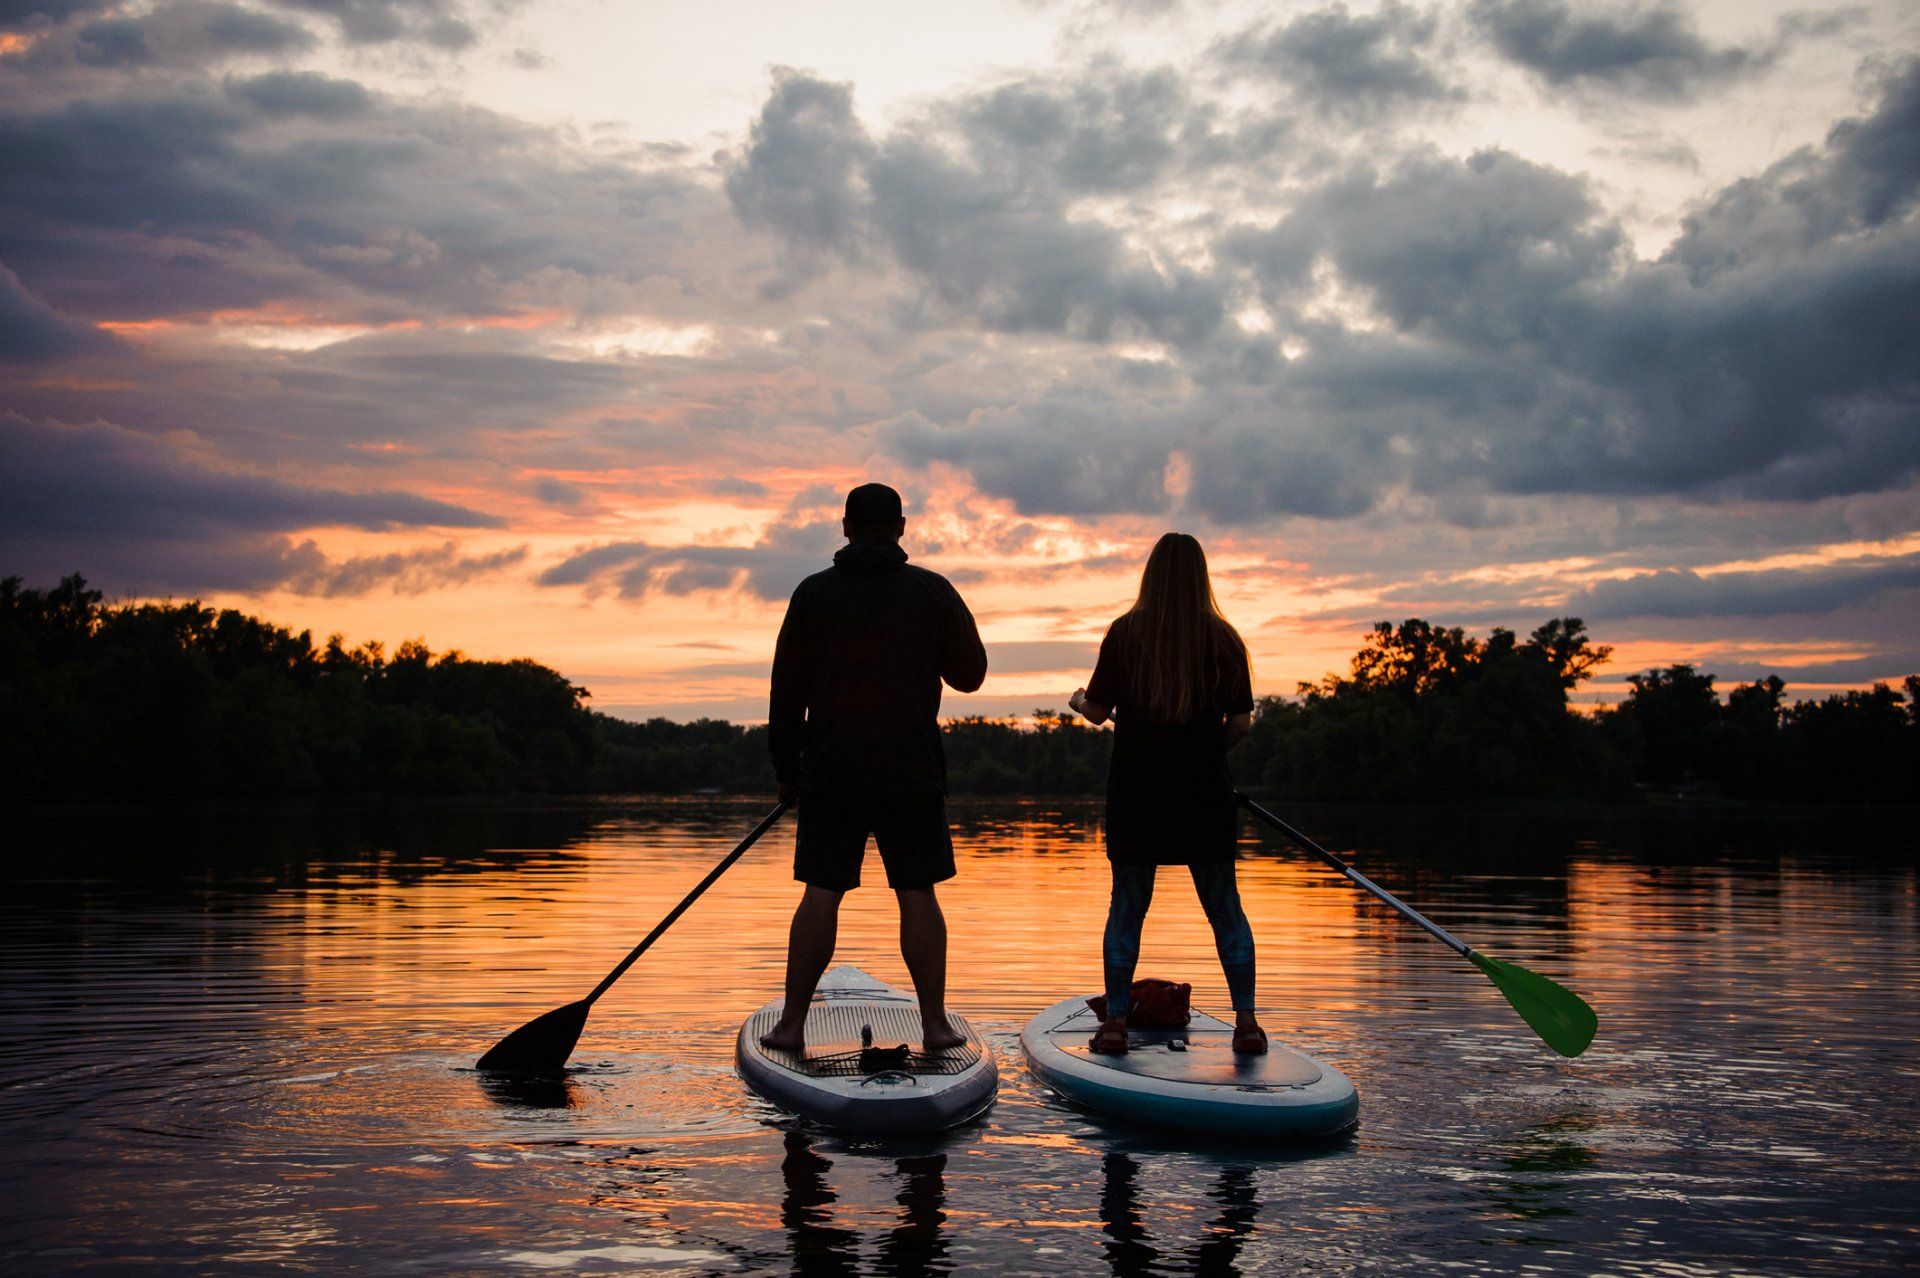 a man and a woman are standing on paddle boards in the water at sunset .